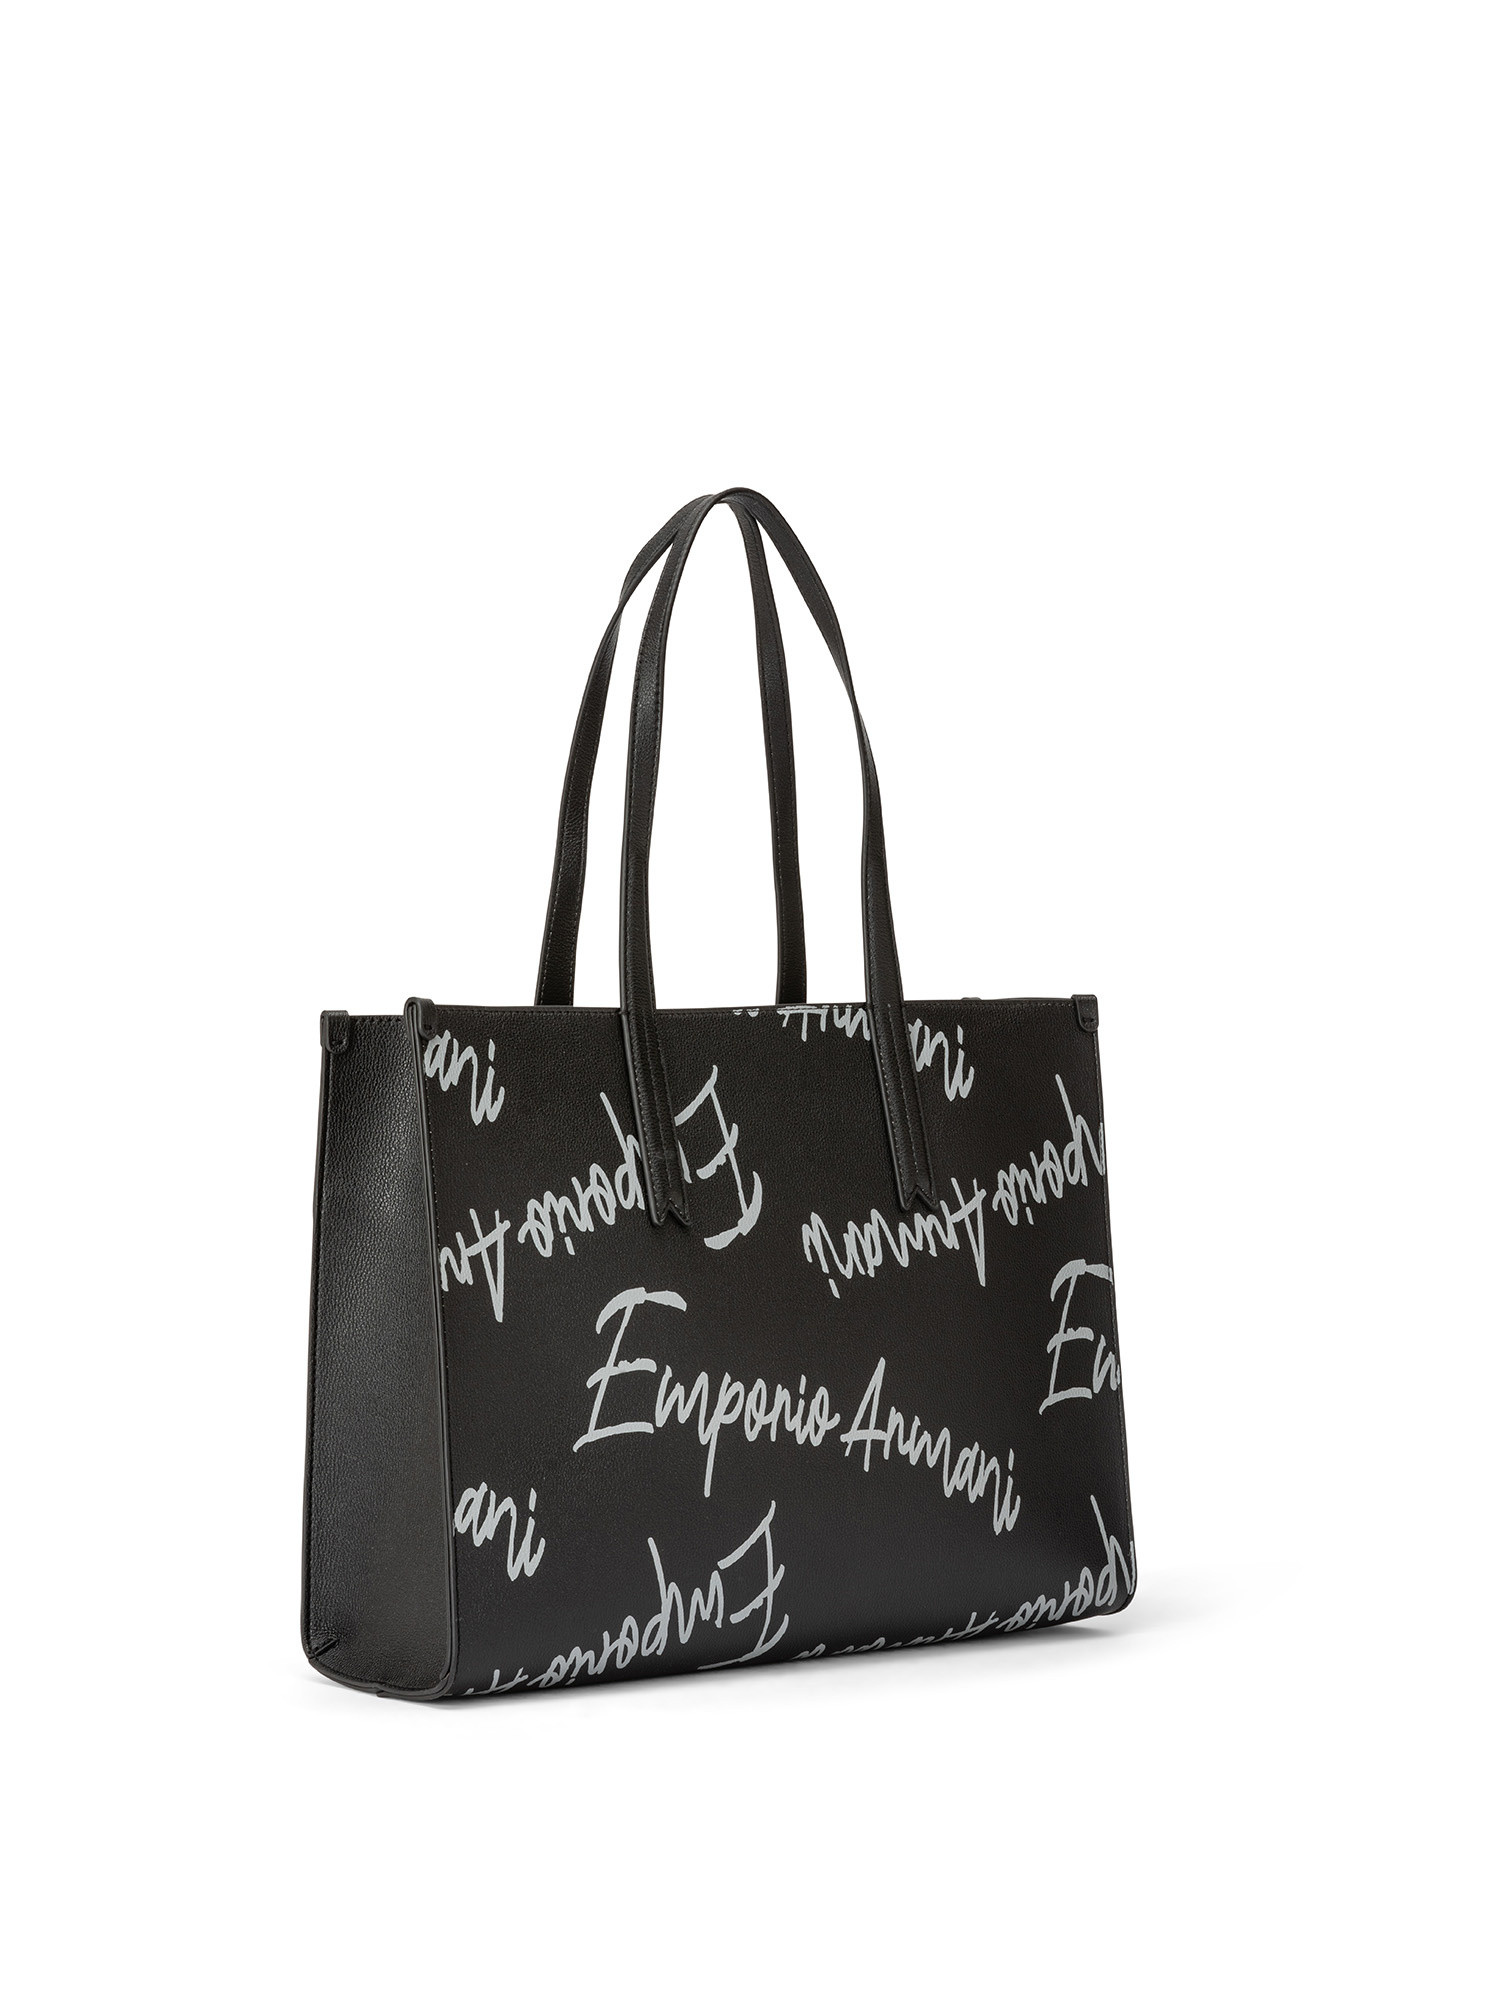 Emporio Armani - Bag with all-over lettering logo, Black, large image number 1